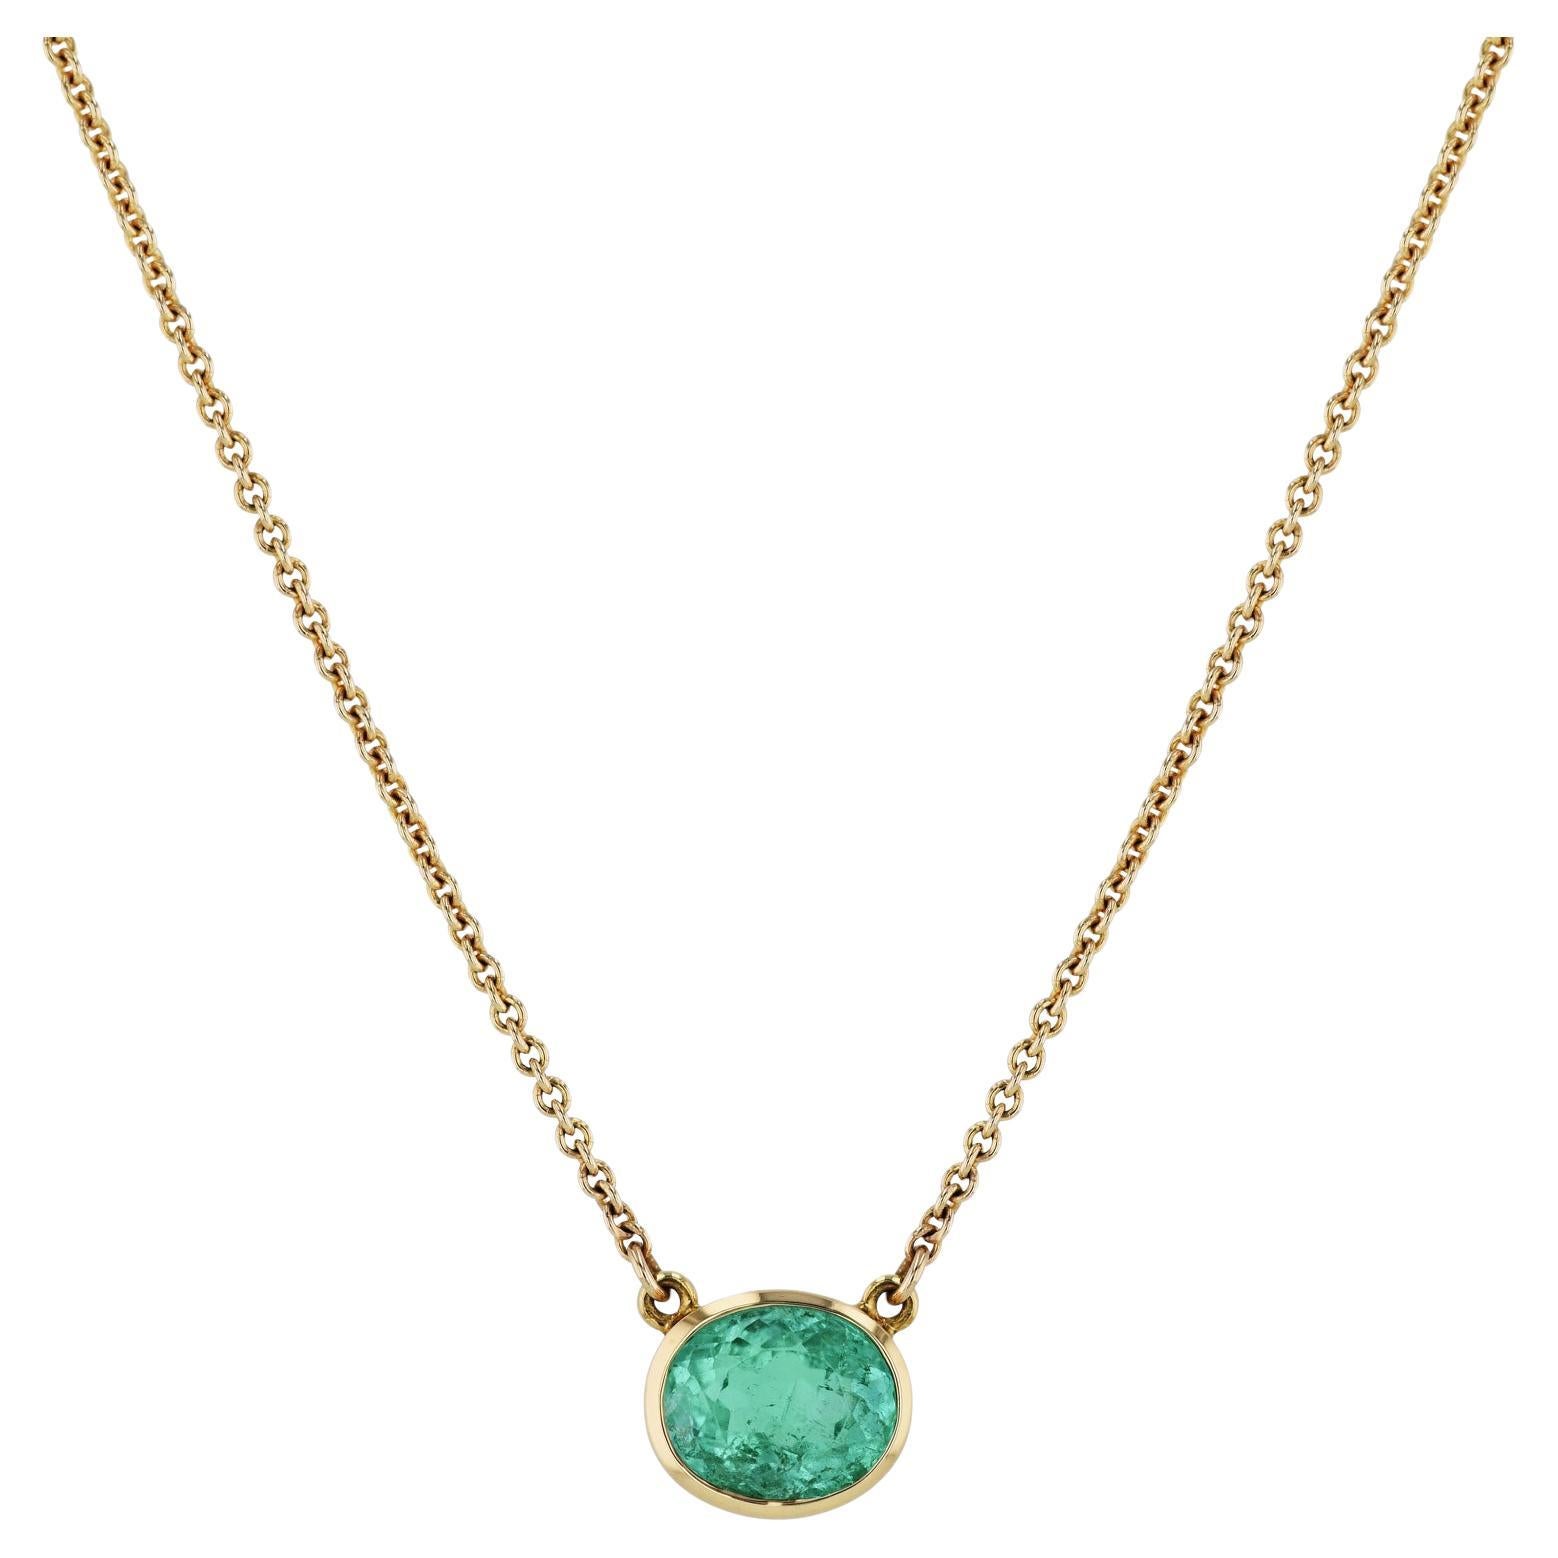 Handmade Colombian Emerald Yellow Gold Pendant Necklace